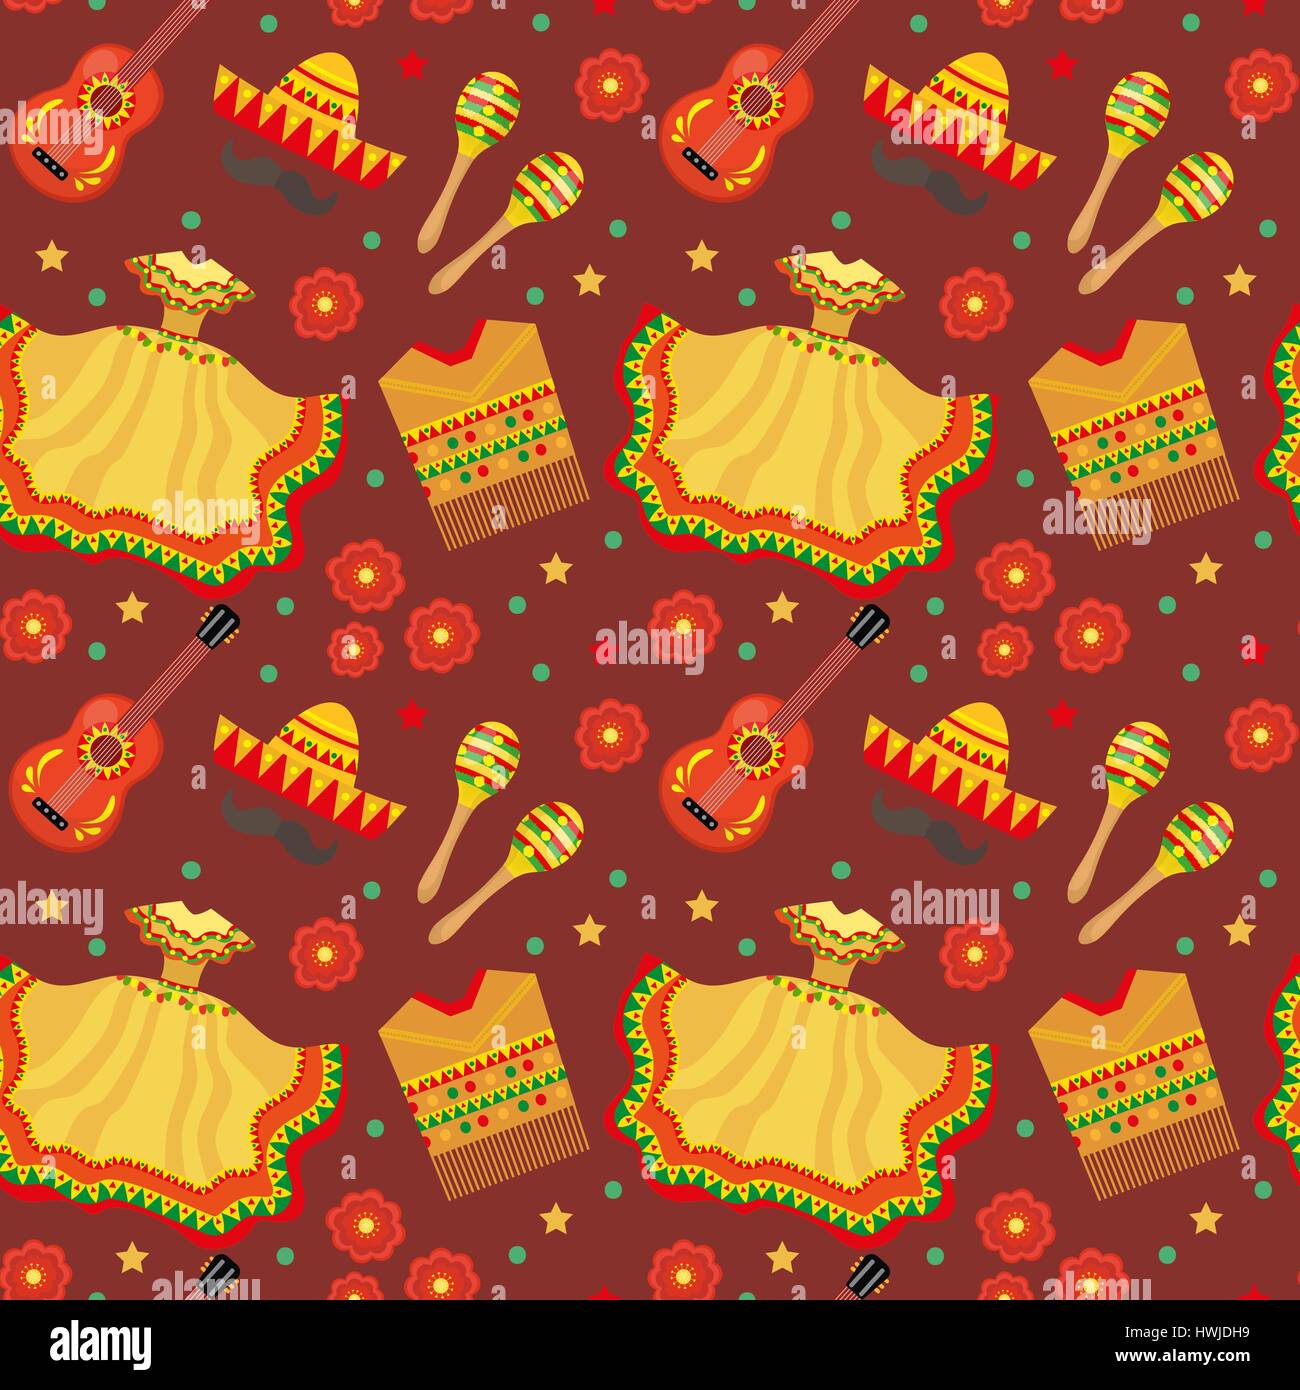 Cinco De Mayo Background Images Browse 23072 Stock Photos  Vectors Free  Download with Trial  Shutterstock